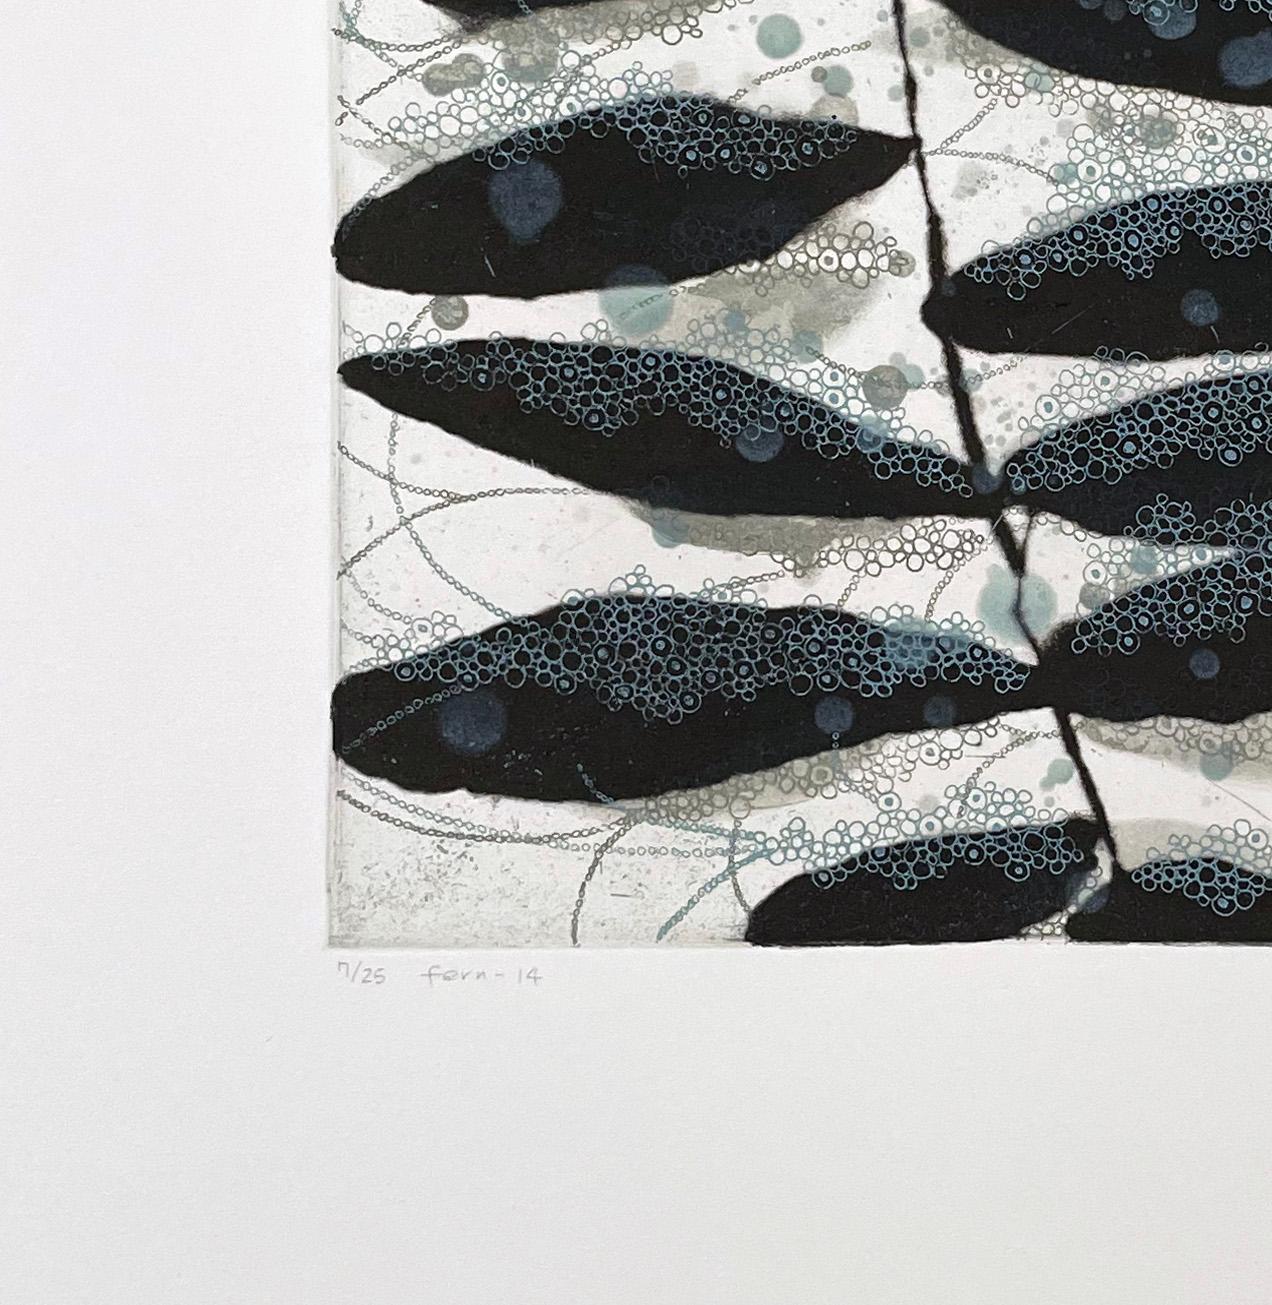 Carborundum and intaglio. Signed and numbered from the edition of 25. 

Tachibana’s prints take their inspiration from nature, a meditation on the forms and shapes of water, ferns and the basic elements of life.

Seiko Tachibana was born in Japan